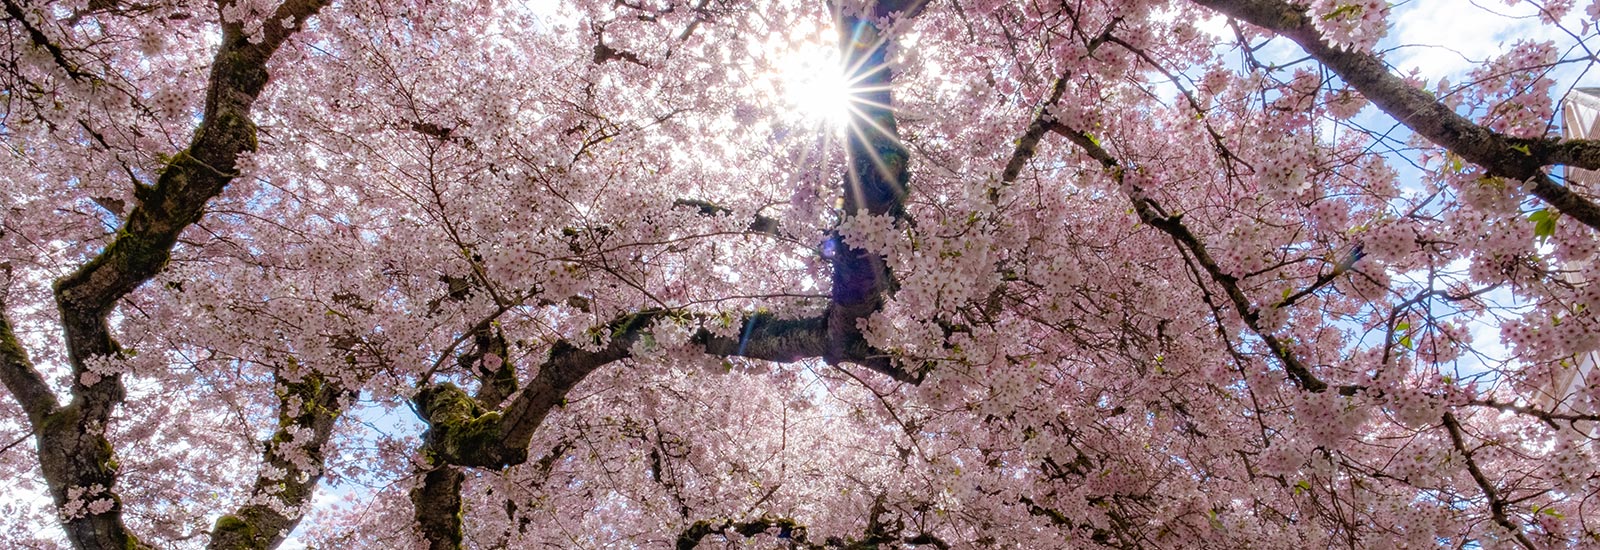 Cherry blossom tree in bloom